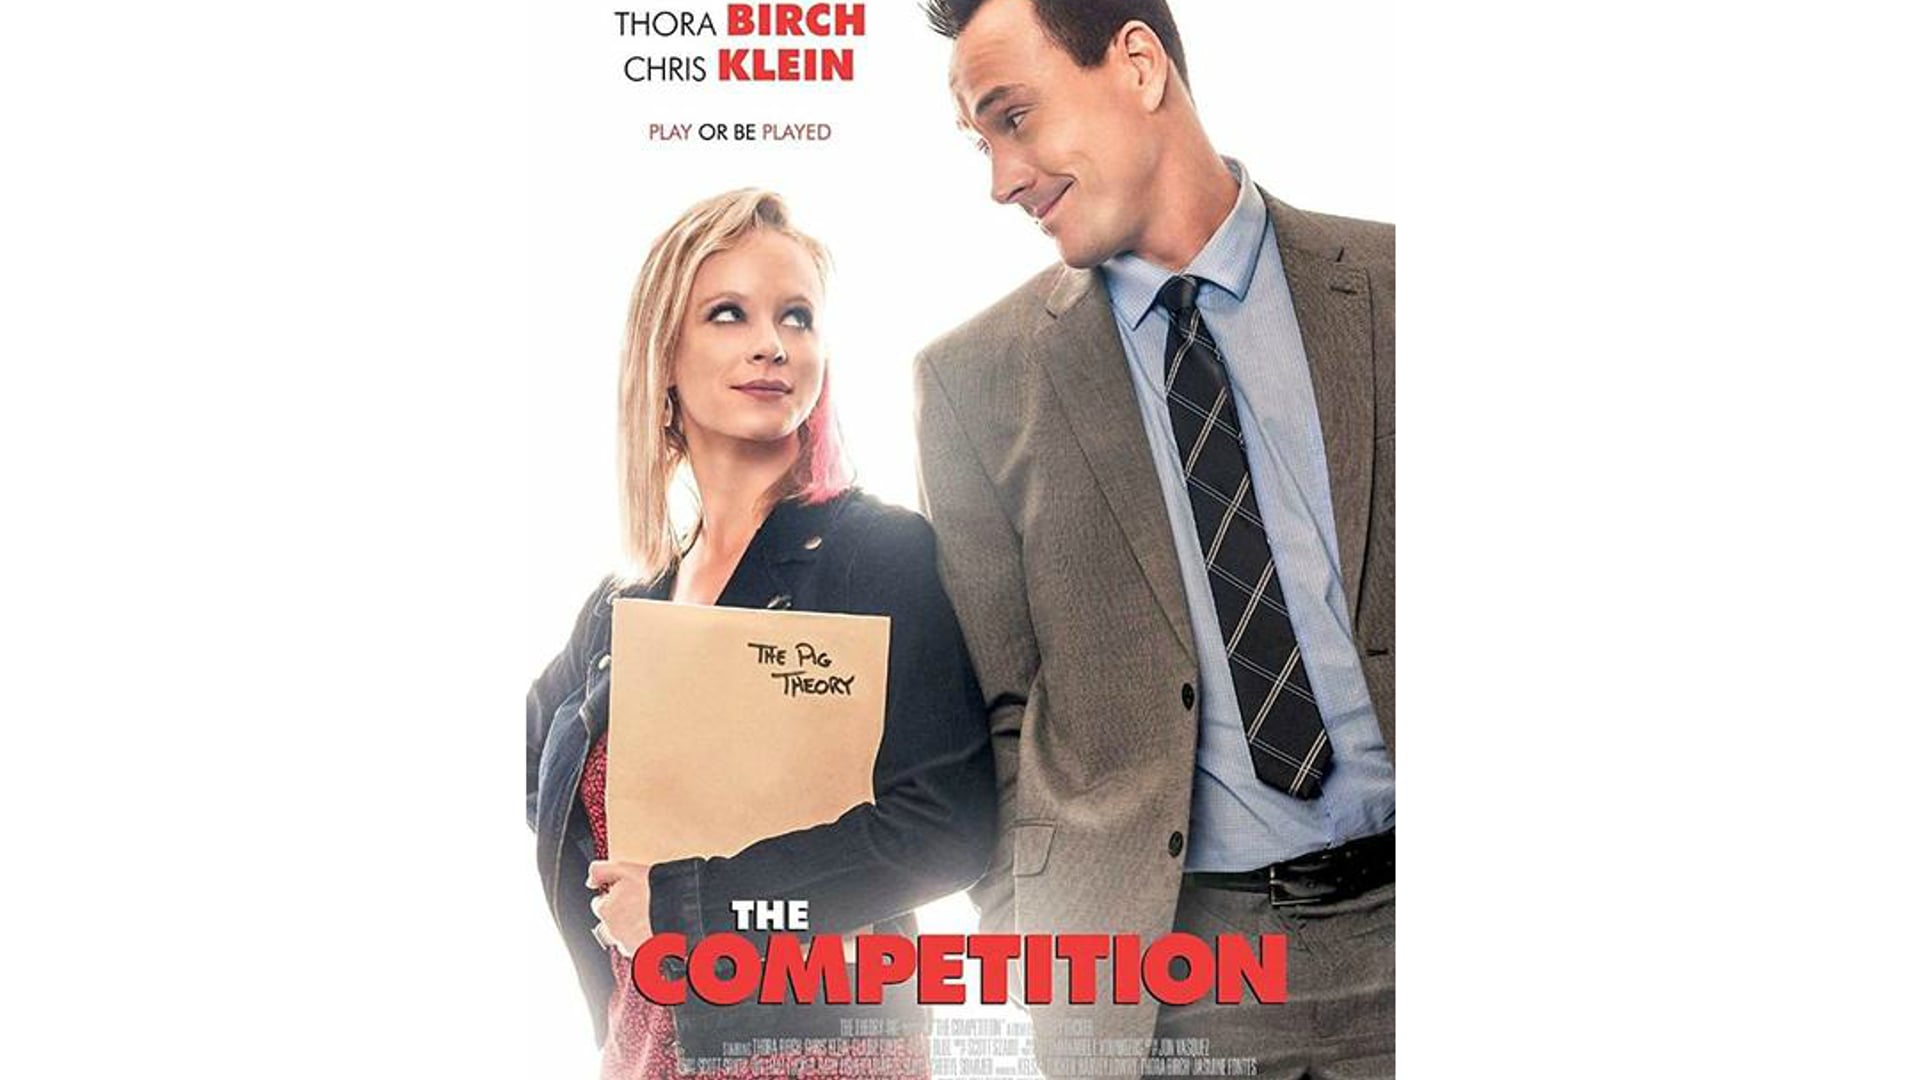 THE COMPETITION Trailer #1 NEW (2018) Comedy Romance Movie HD